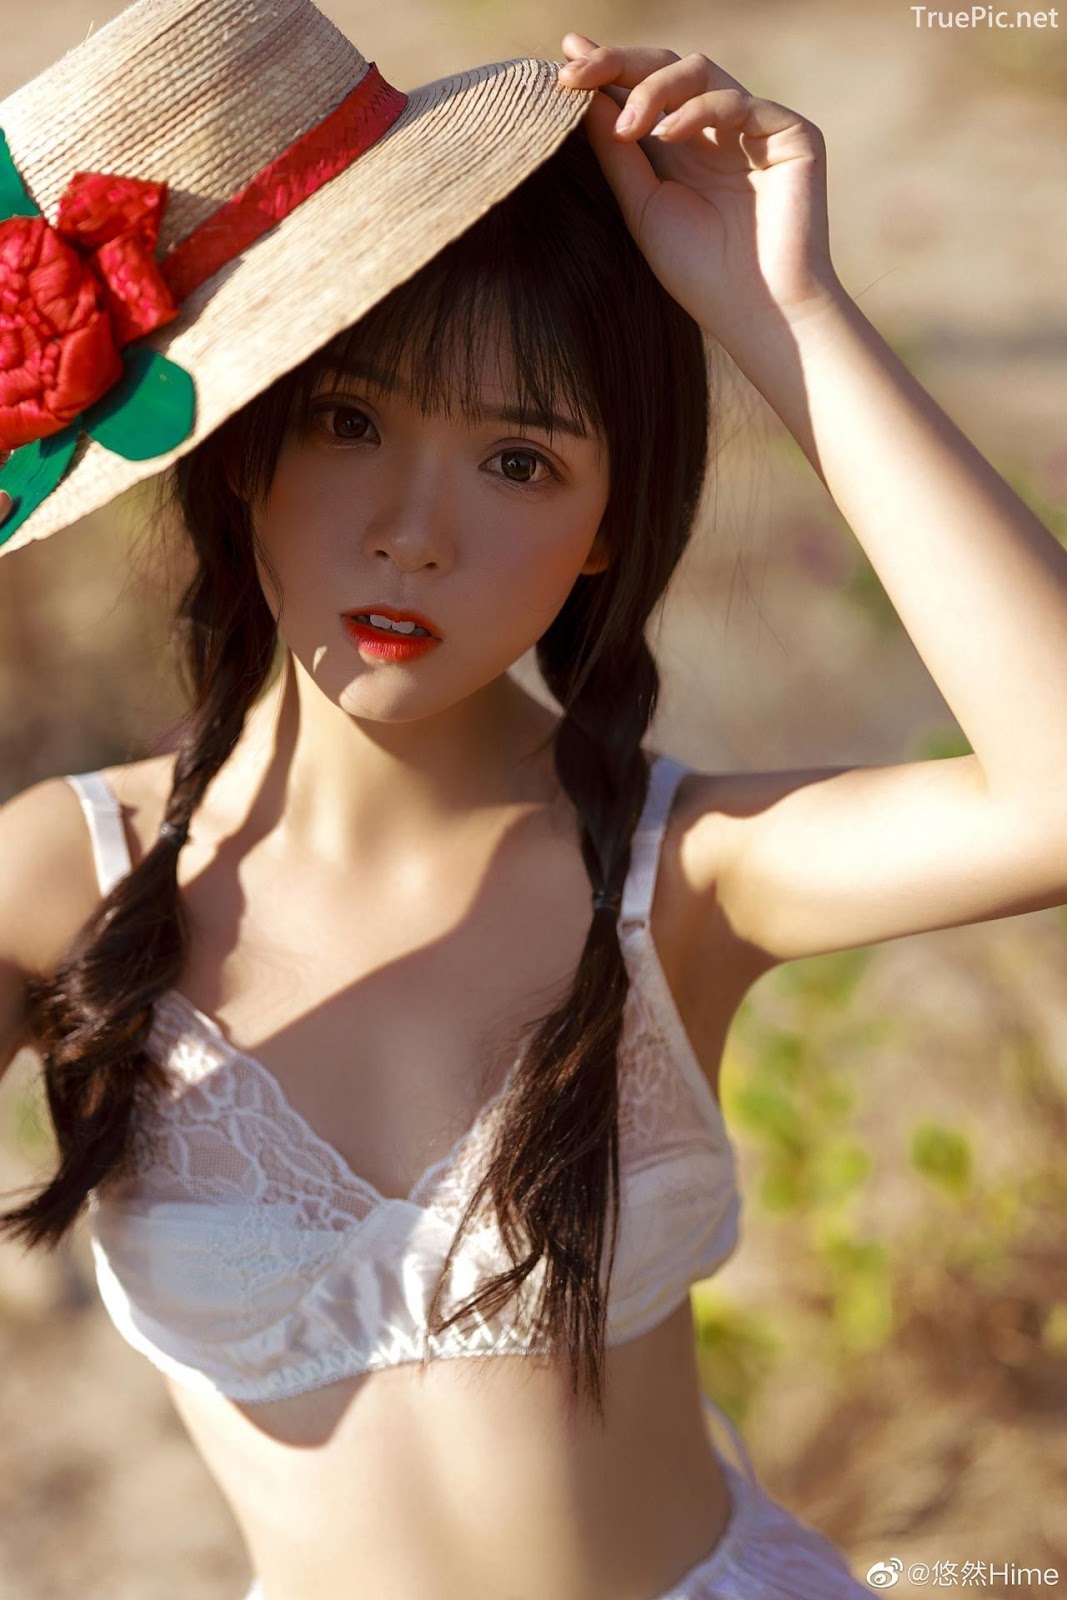 Chinese bautiful angel - Stay with you on a beautiful beach - TruePic.net - Picture 11